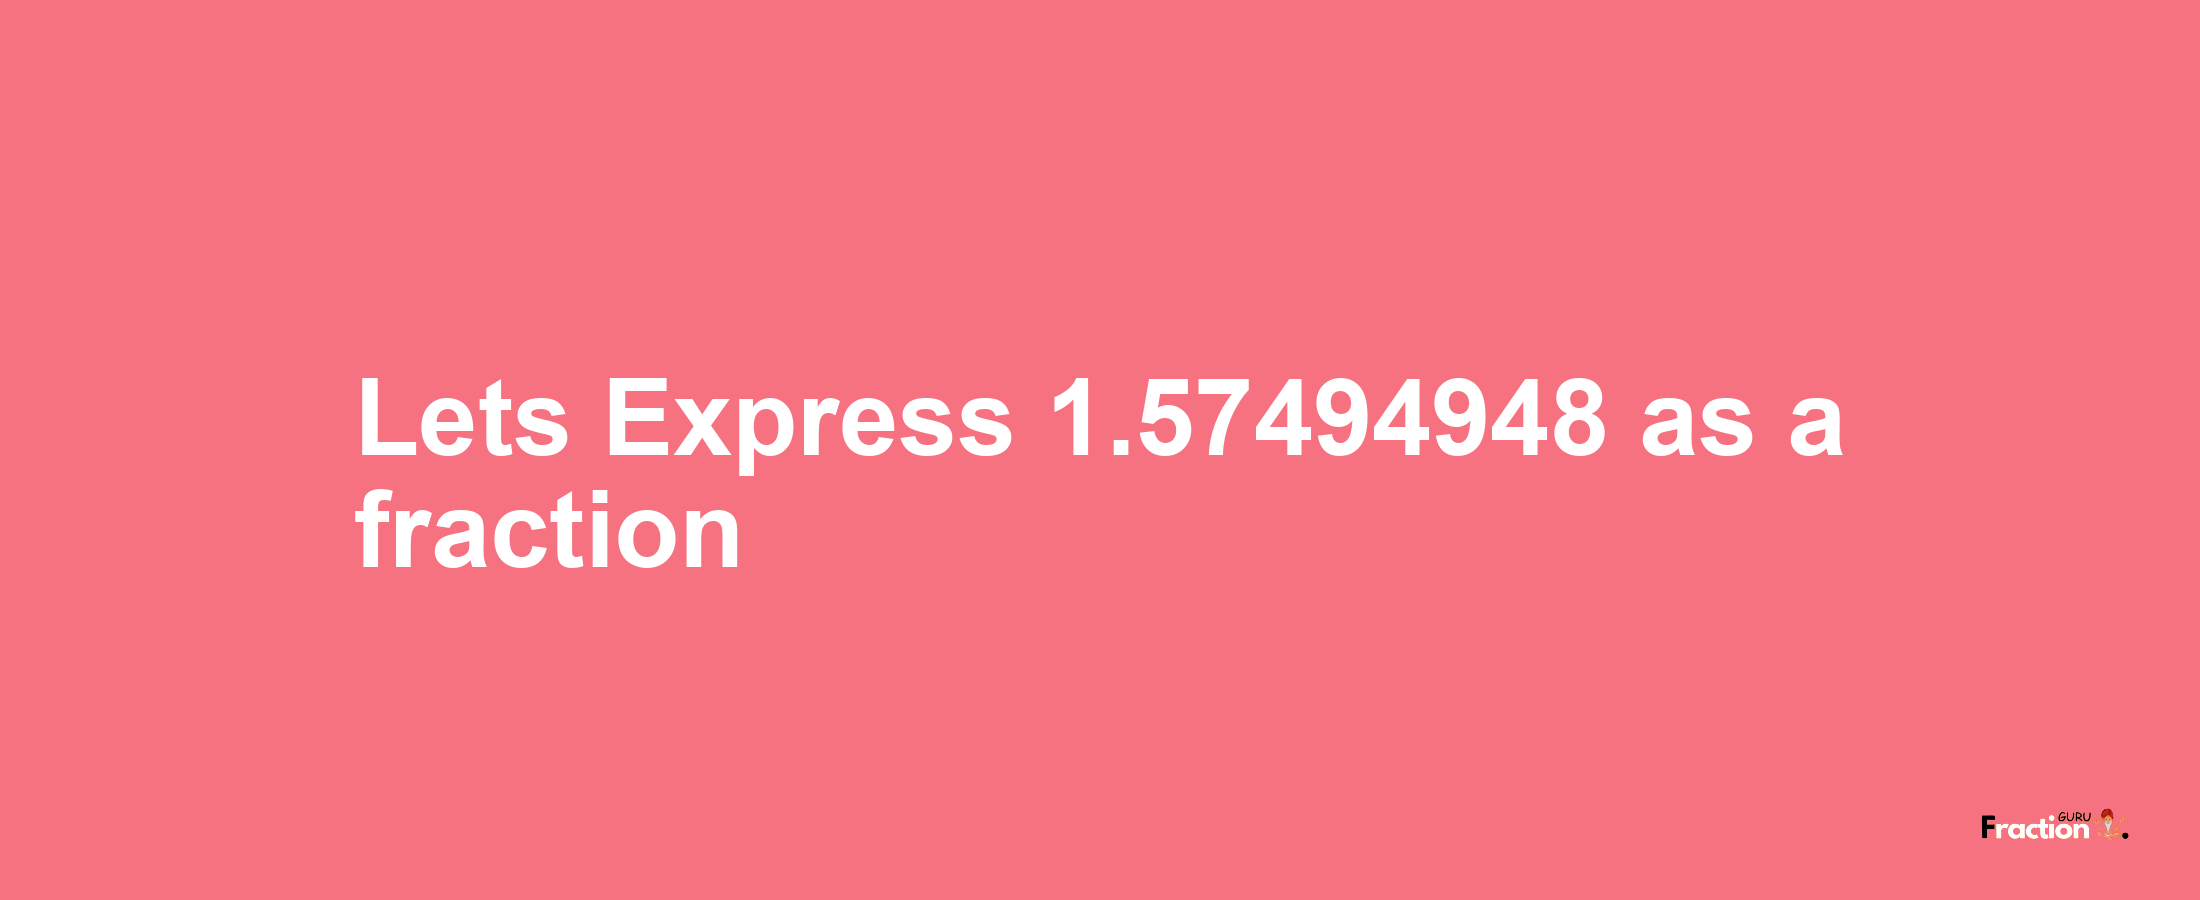 Lets Express 1.57494948 as afraction